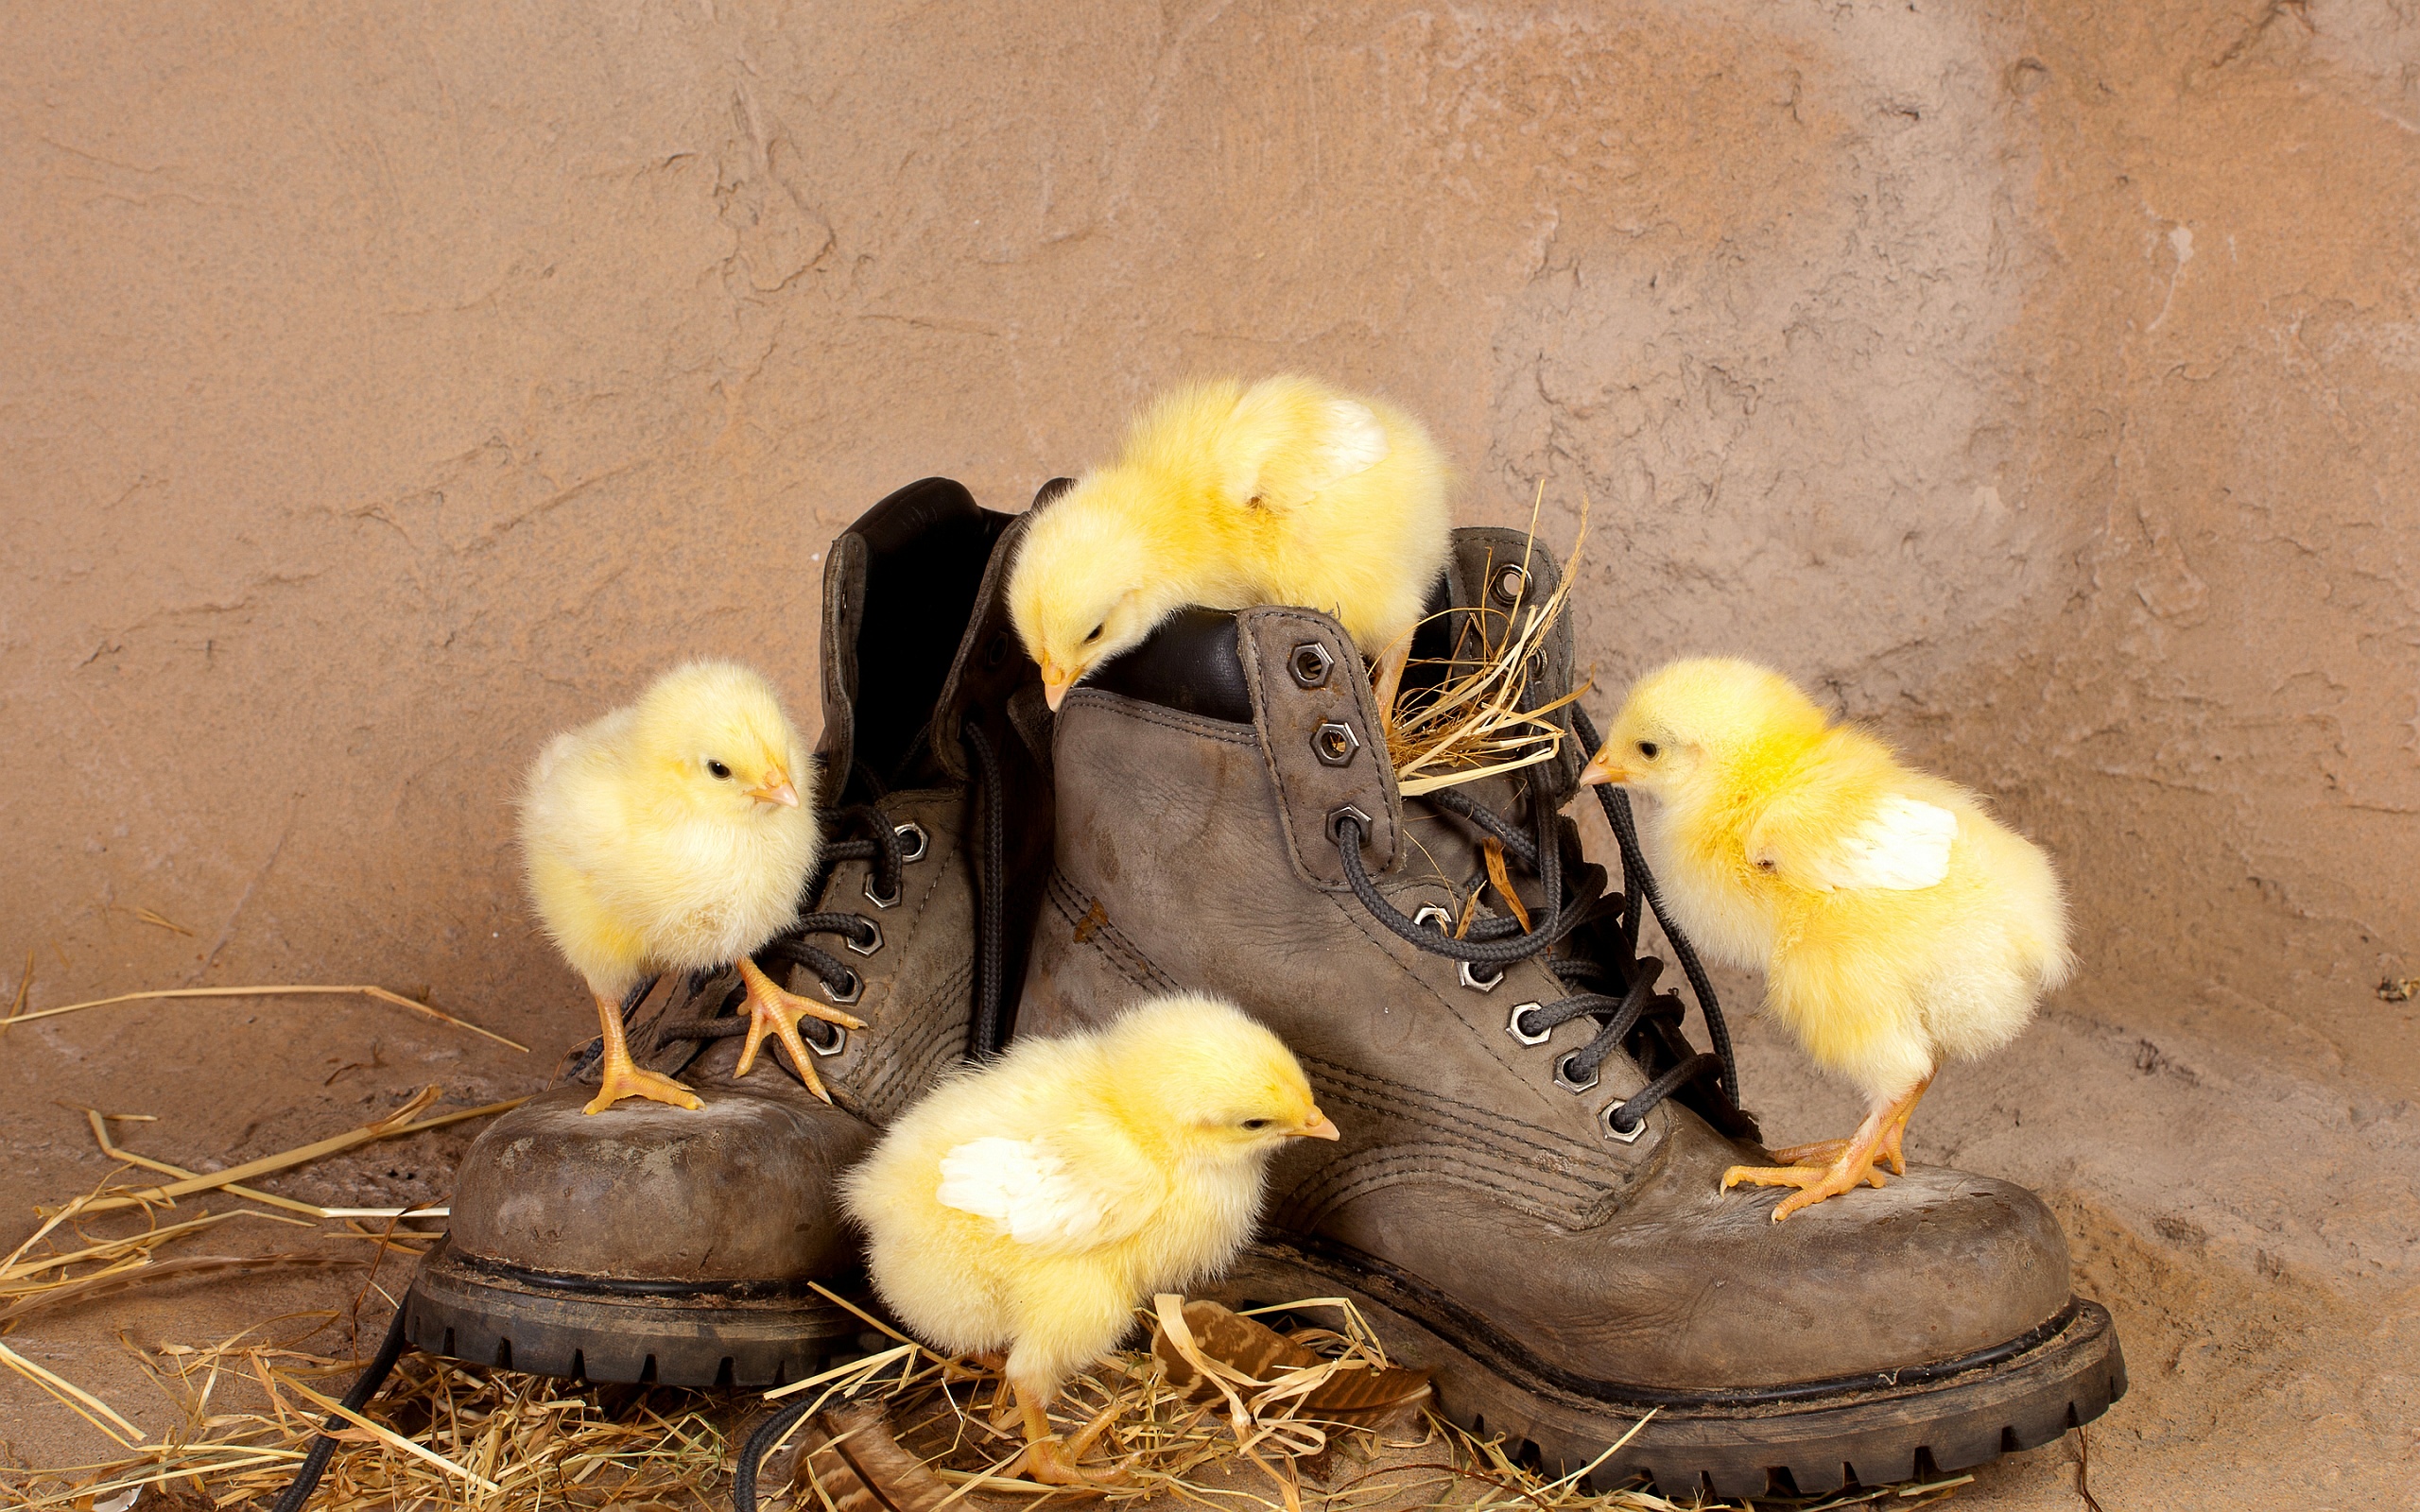 Chicken on Shoes